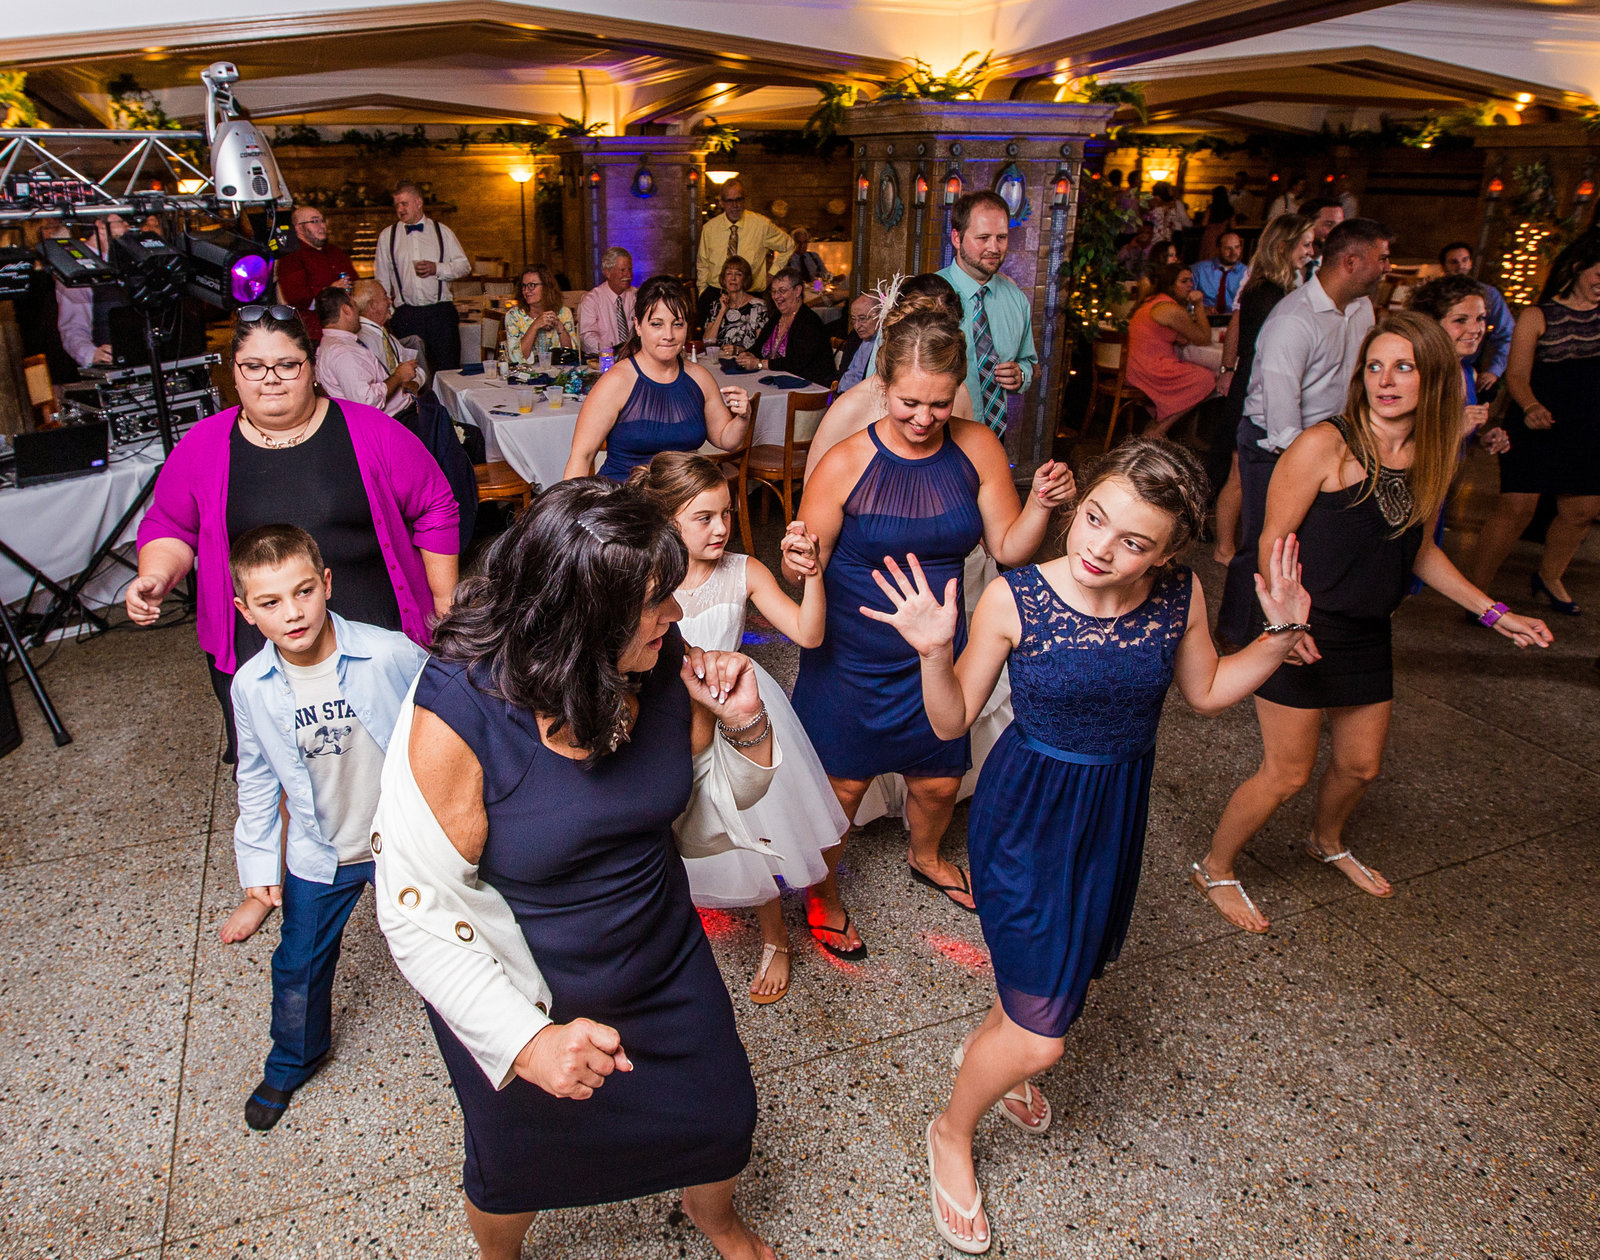 Guests dance at Masonic Temple wedding reception